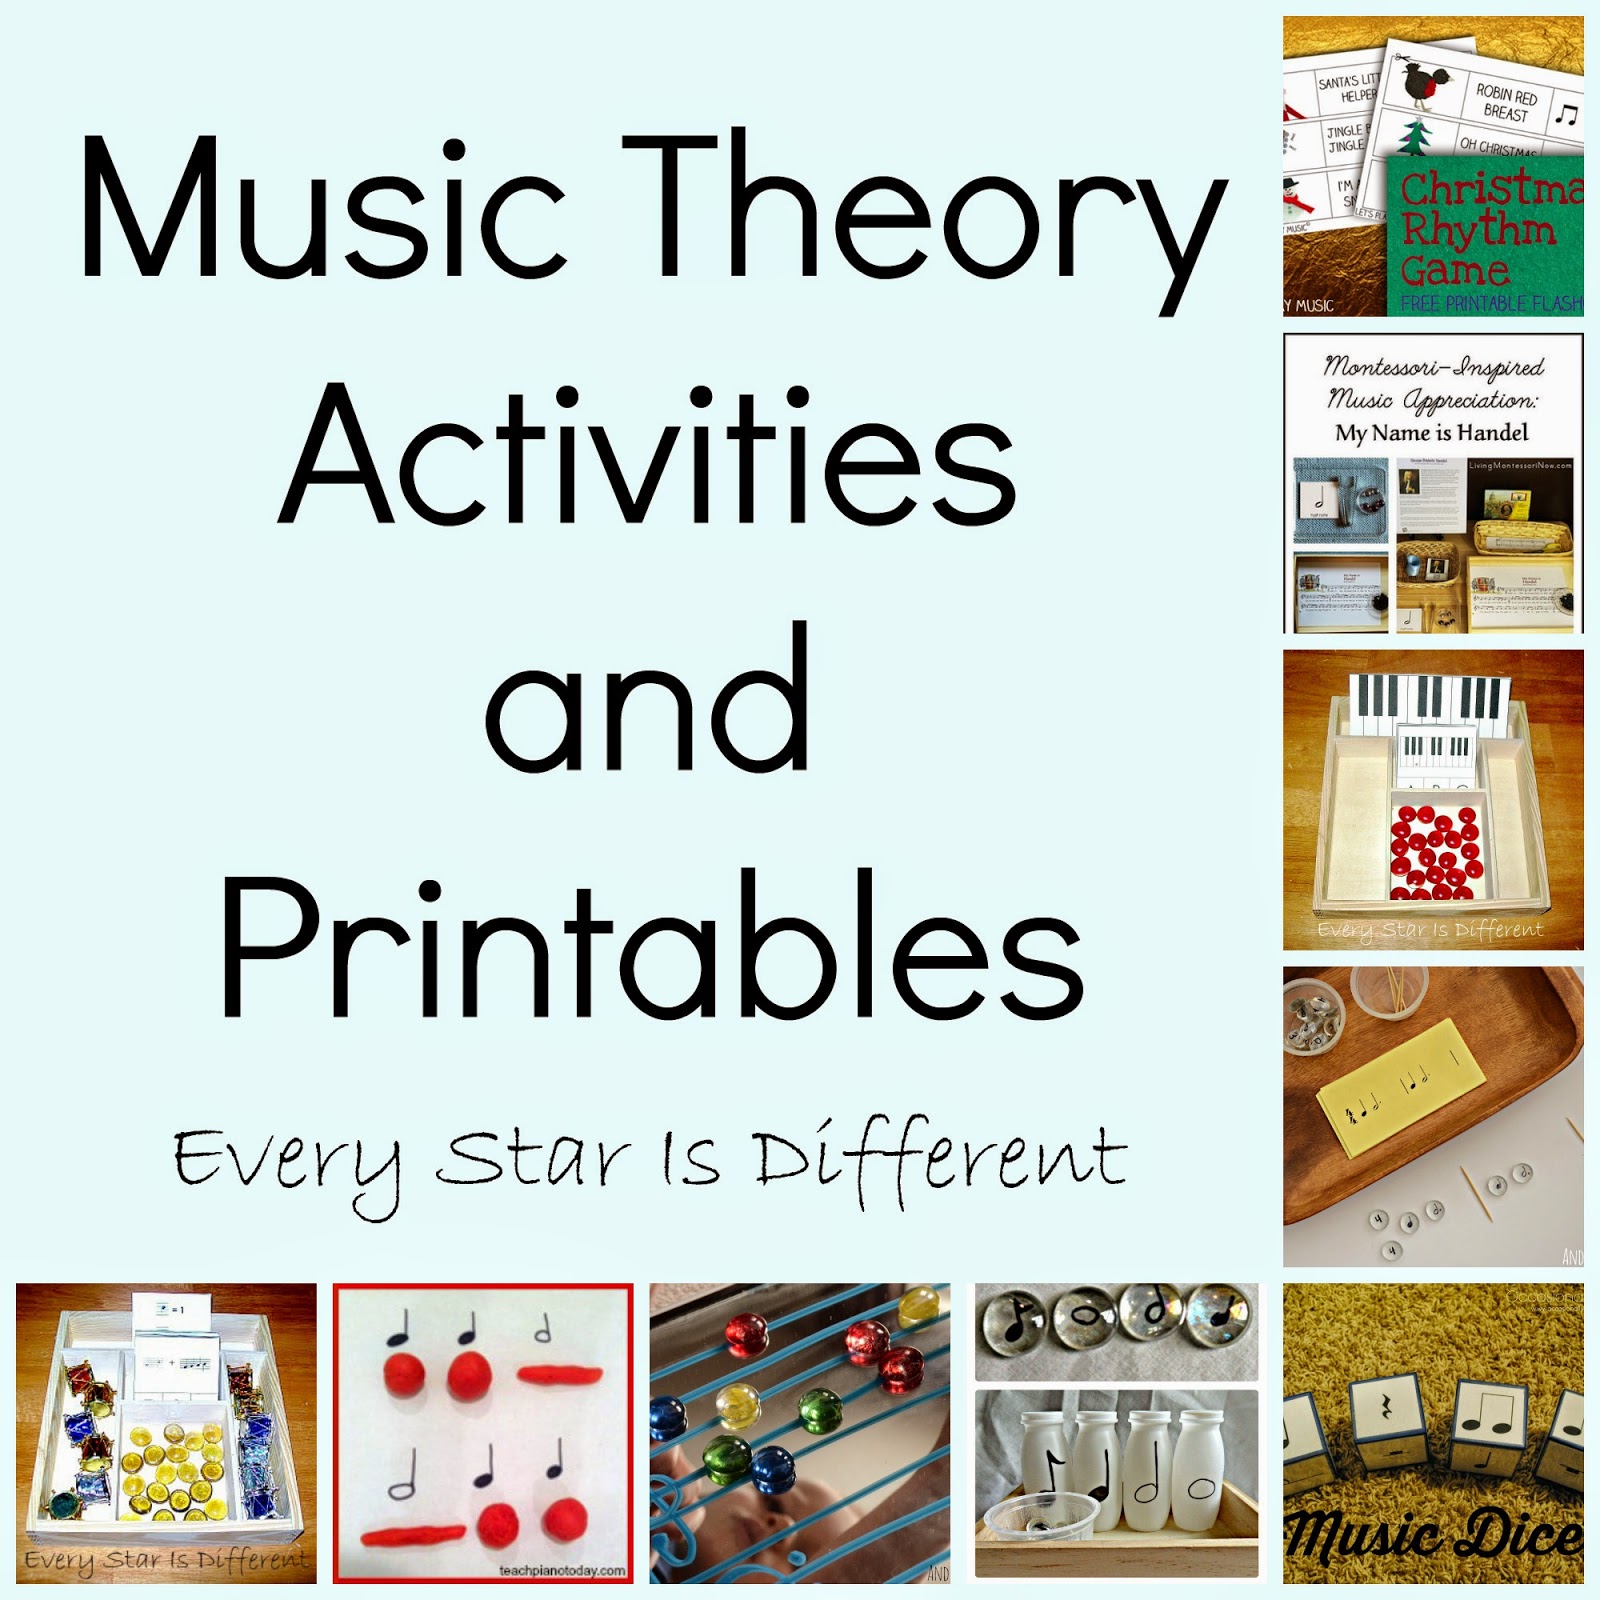 Music Theory Activities and Printables